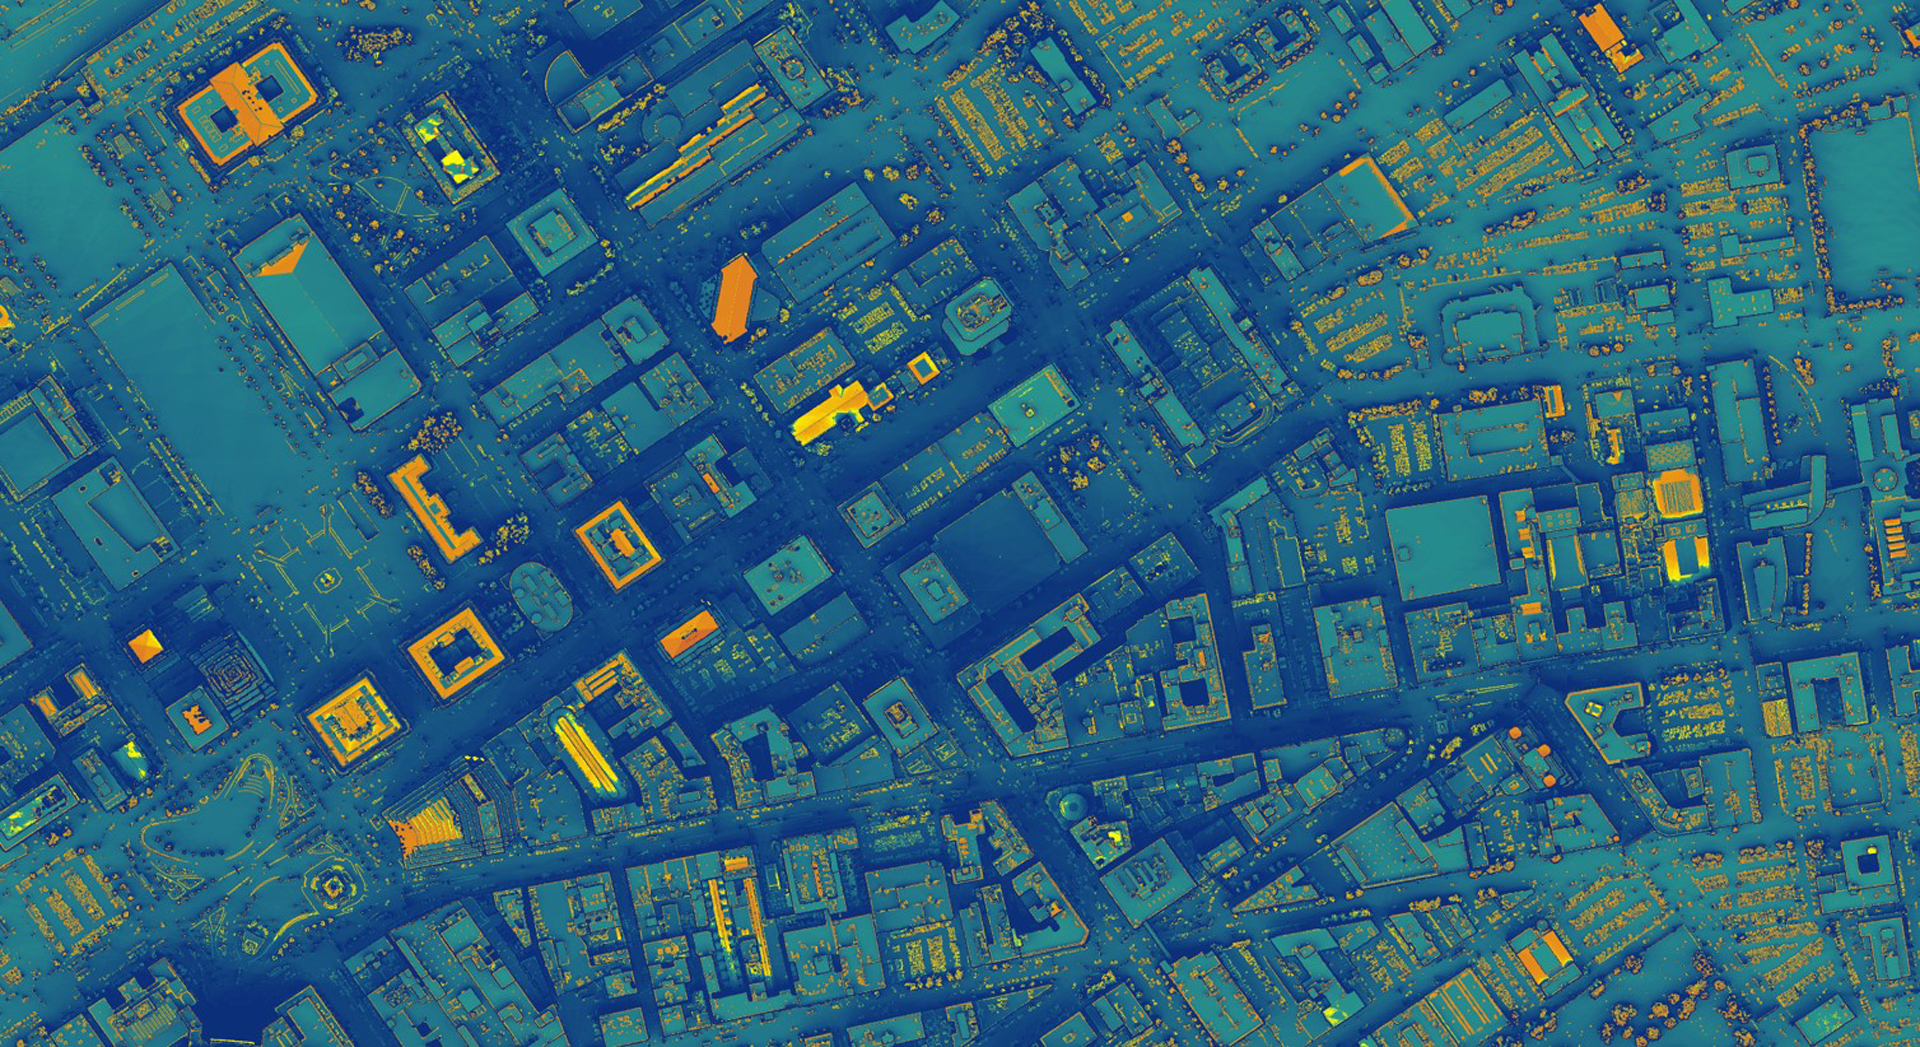 Annual solar energy generation potential calculated using NASA POWER (preprocessed CERES and MODIS data from the Aqua and Terra satellites) in downtown Cleveland, OH. Solar irradiation data are averaged over 22 years (1983 to 2005). LiDAR data were used to model shadowing and the number of sunlight exposure hours per year. Warm colors indicate high solar energy generation potential per square foot. Unshaded rooftops with slopes and aspects that correspond with local solar geometry are optimal for installing solar panels.